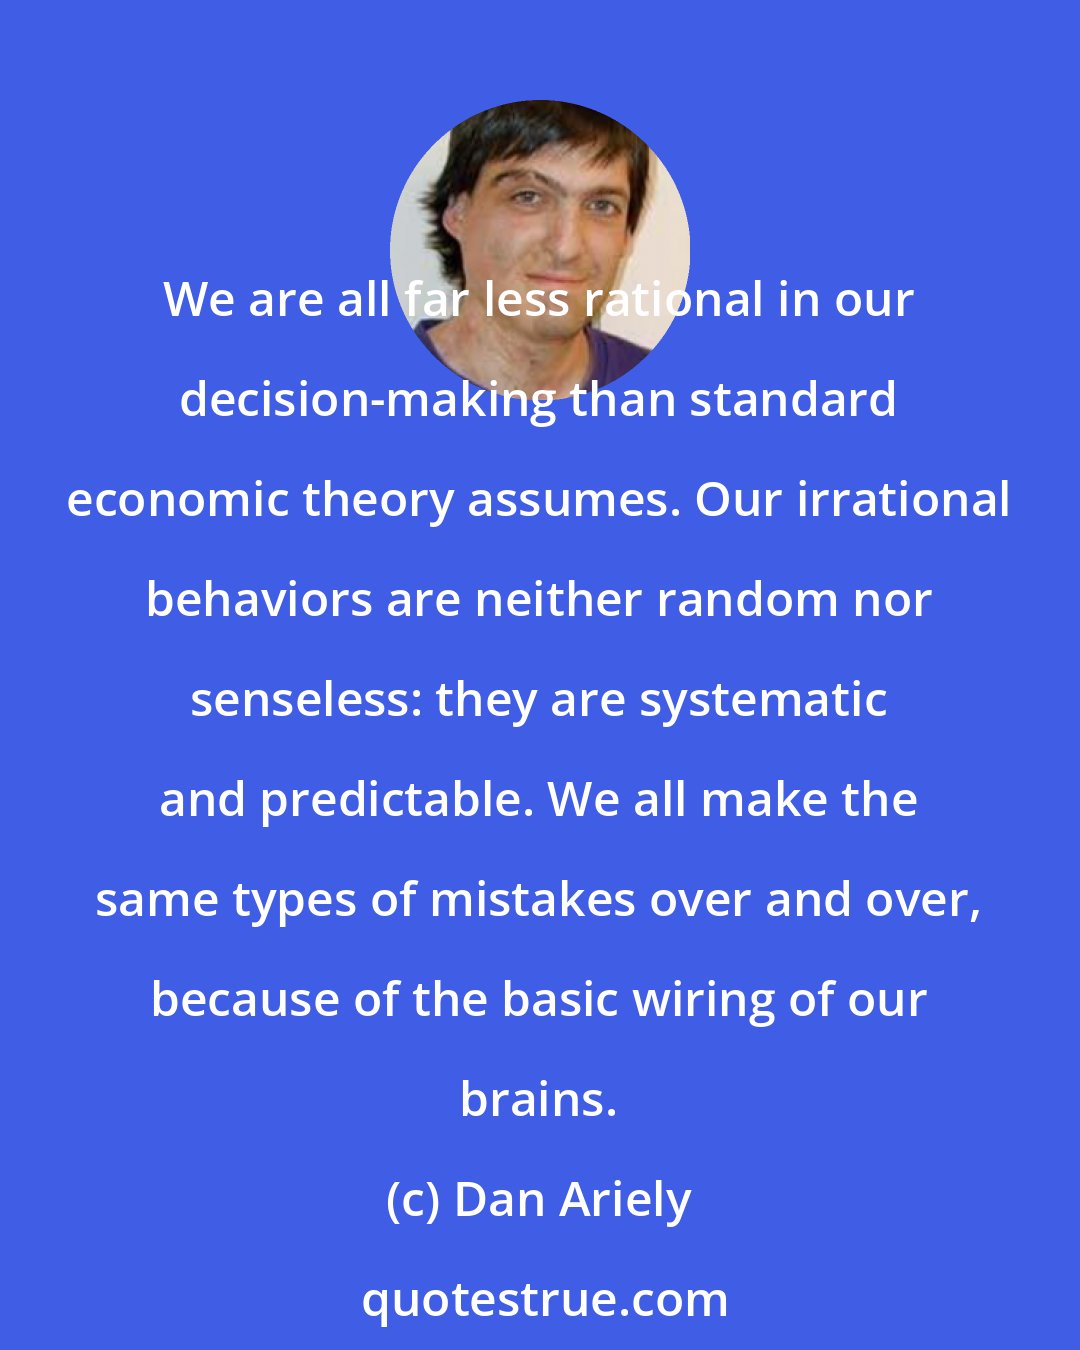 Dan Ariely: We are all far less rational in our decision-making than standard economic theory assumes. Our irrational behaviors are neither random nor senseless: they are systematic and predictable. We all make the same types of mistakes over and over, because of the basic wiring of our brains.